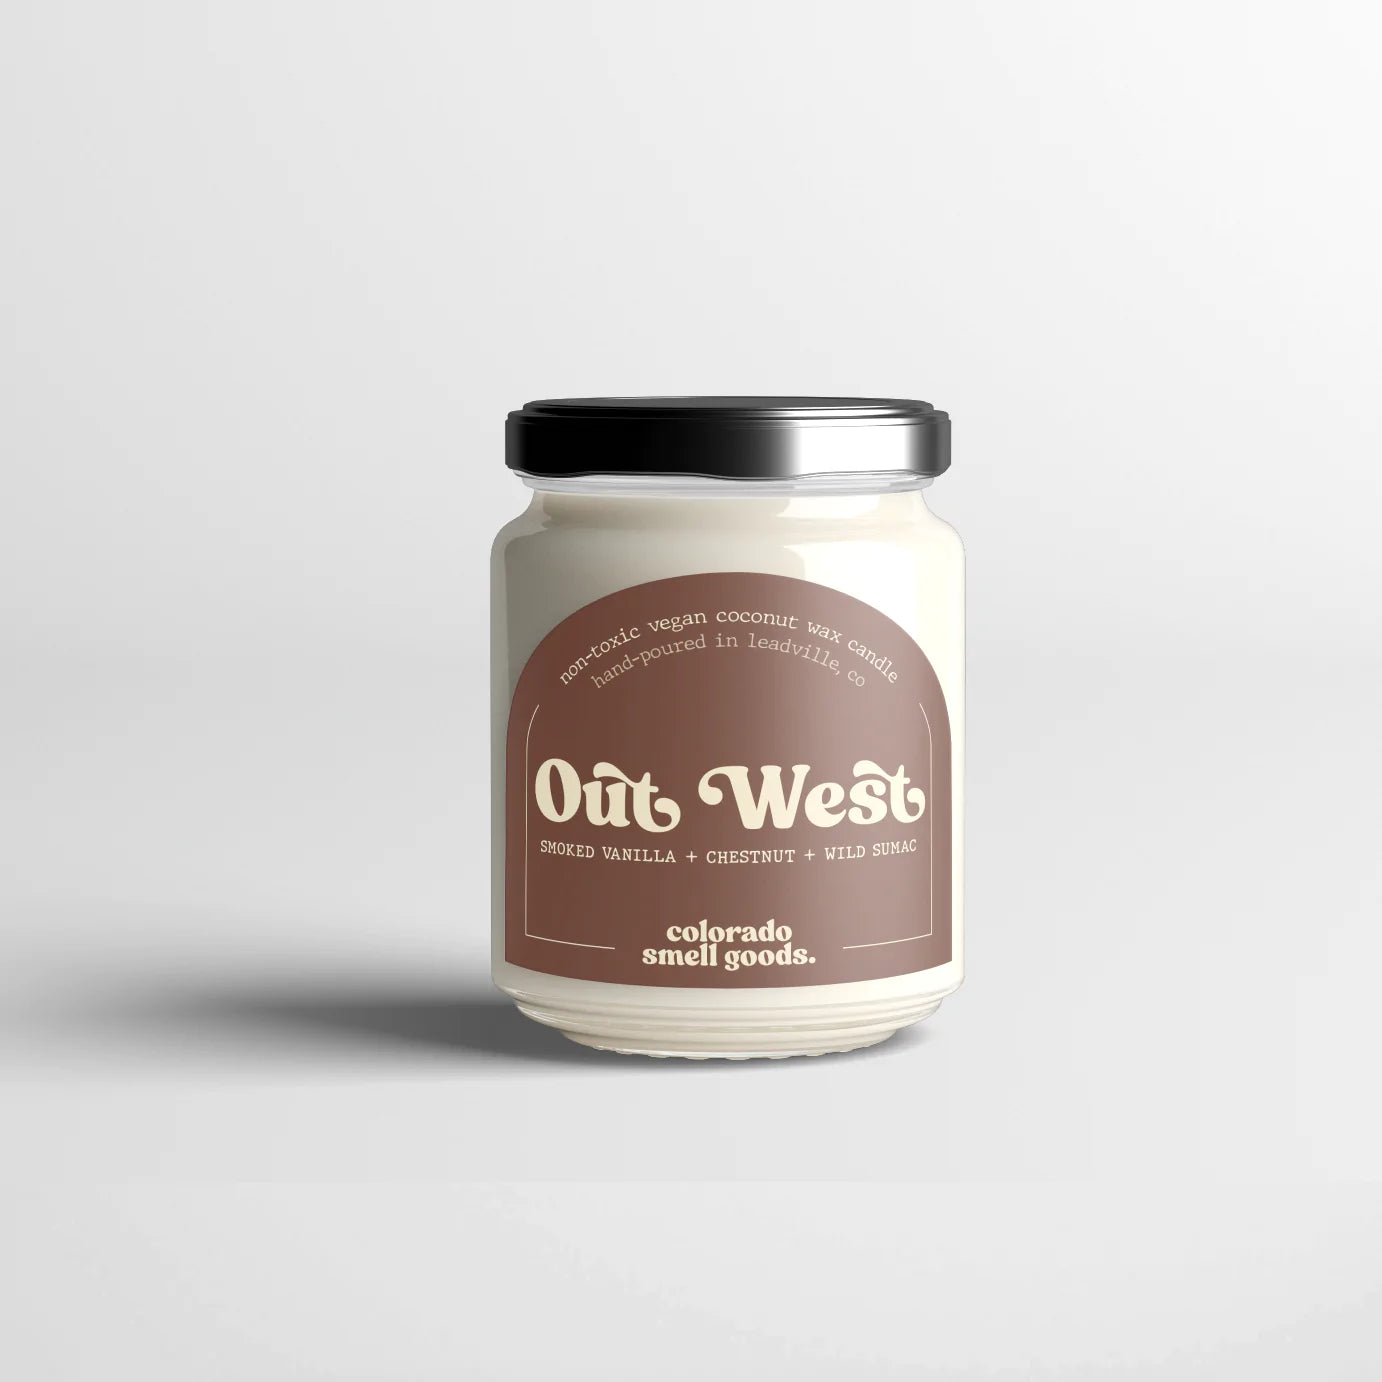 Out West - Coconut Wax Candle